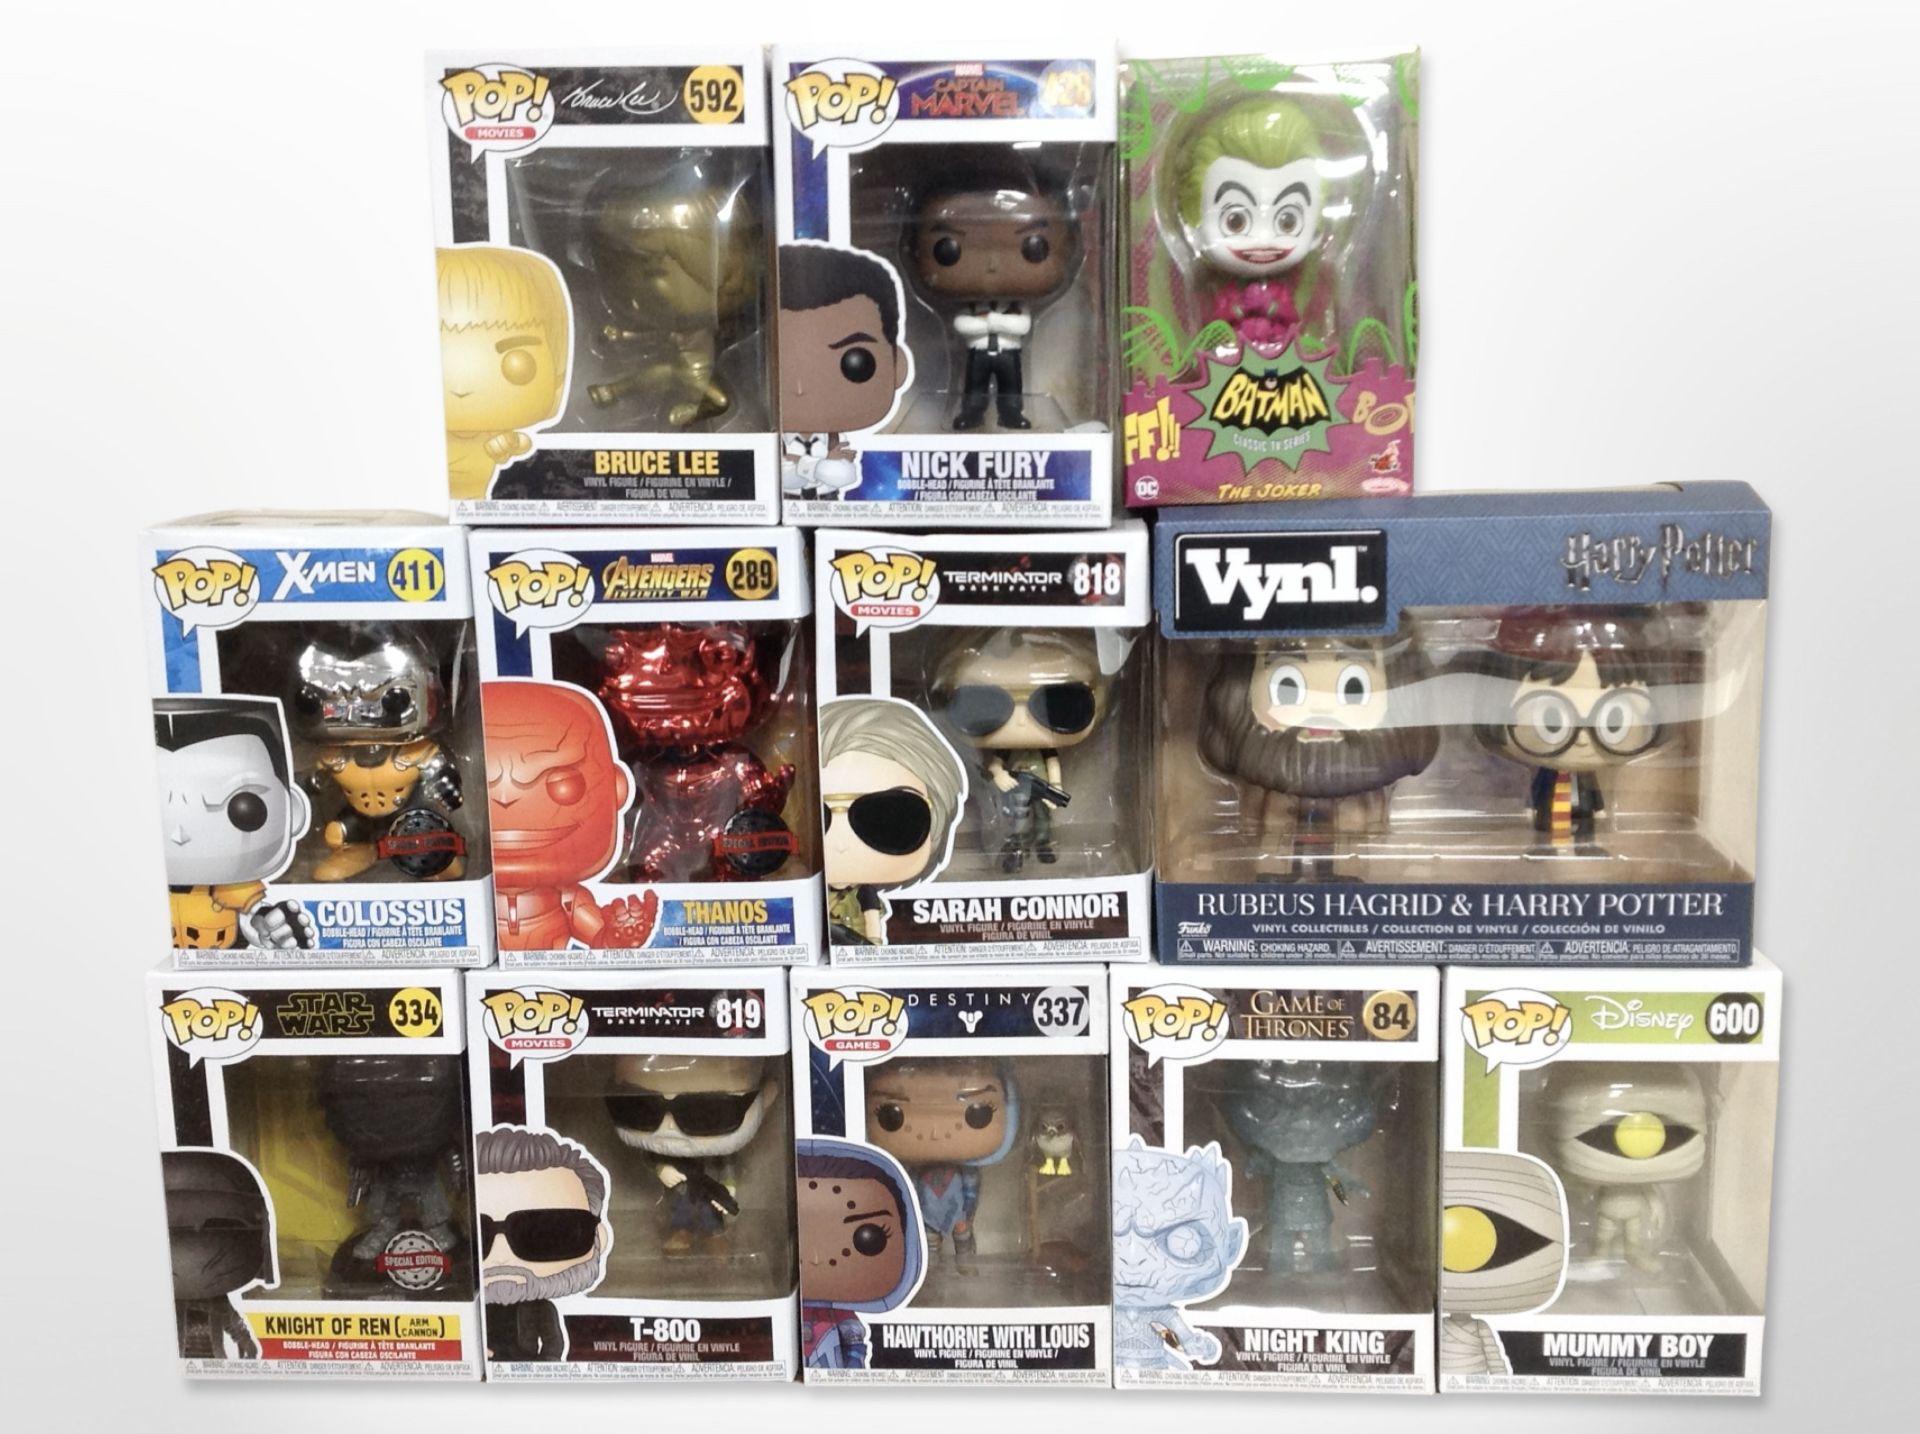 12 Funko Pop! and other figurines, including Marvel, Harry Potter, Game of Thrones, etc., boxed.